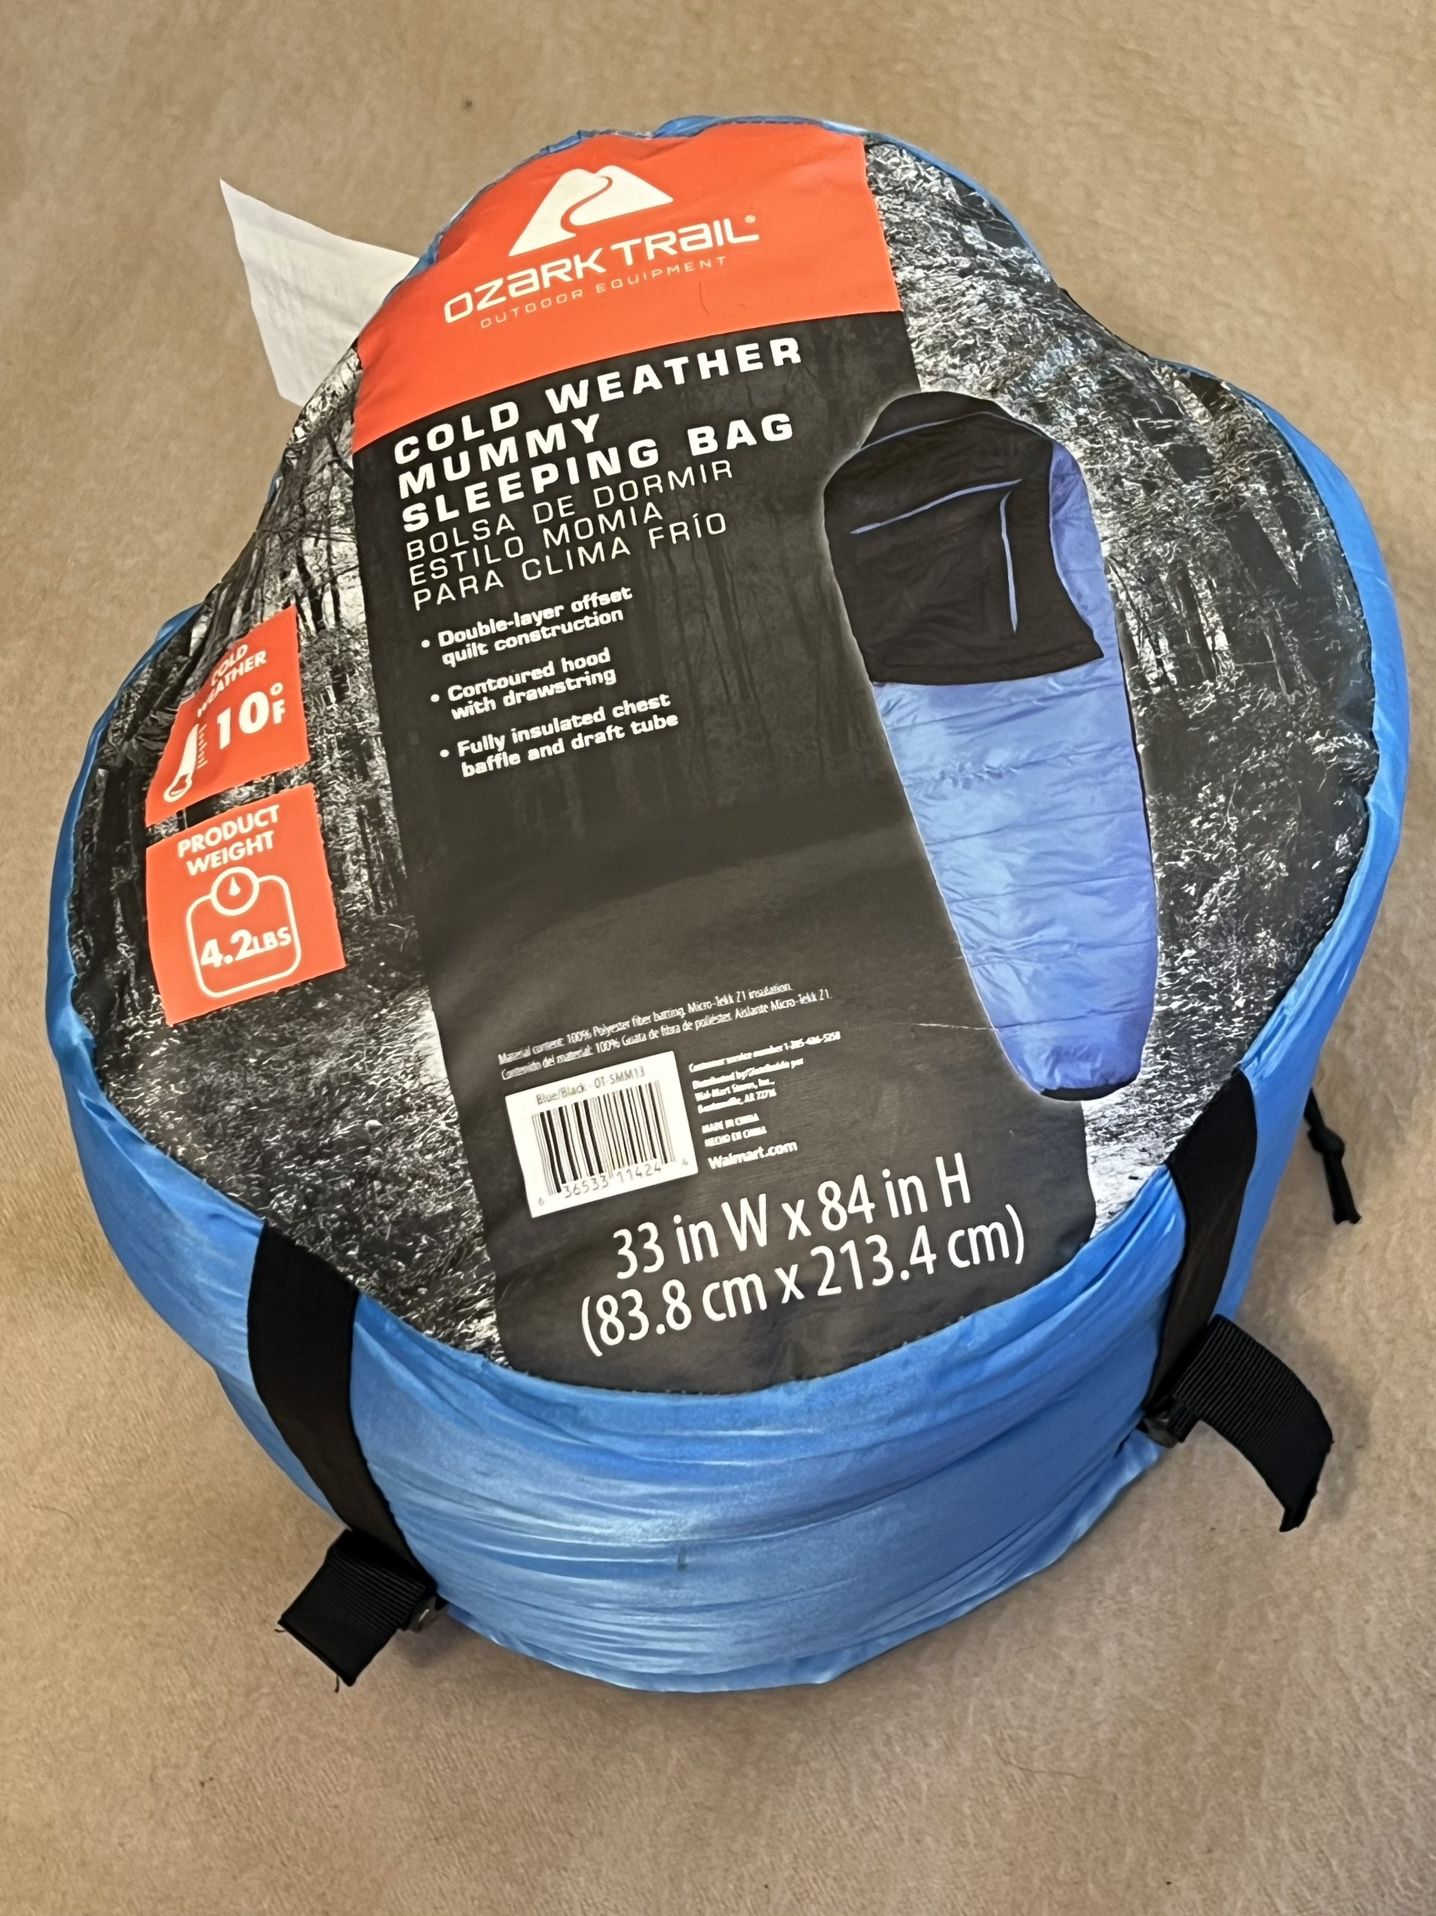 🔥2 Sleeping Bags Ozark Trail and Coleman $35 for both